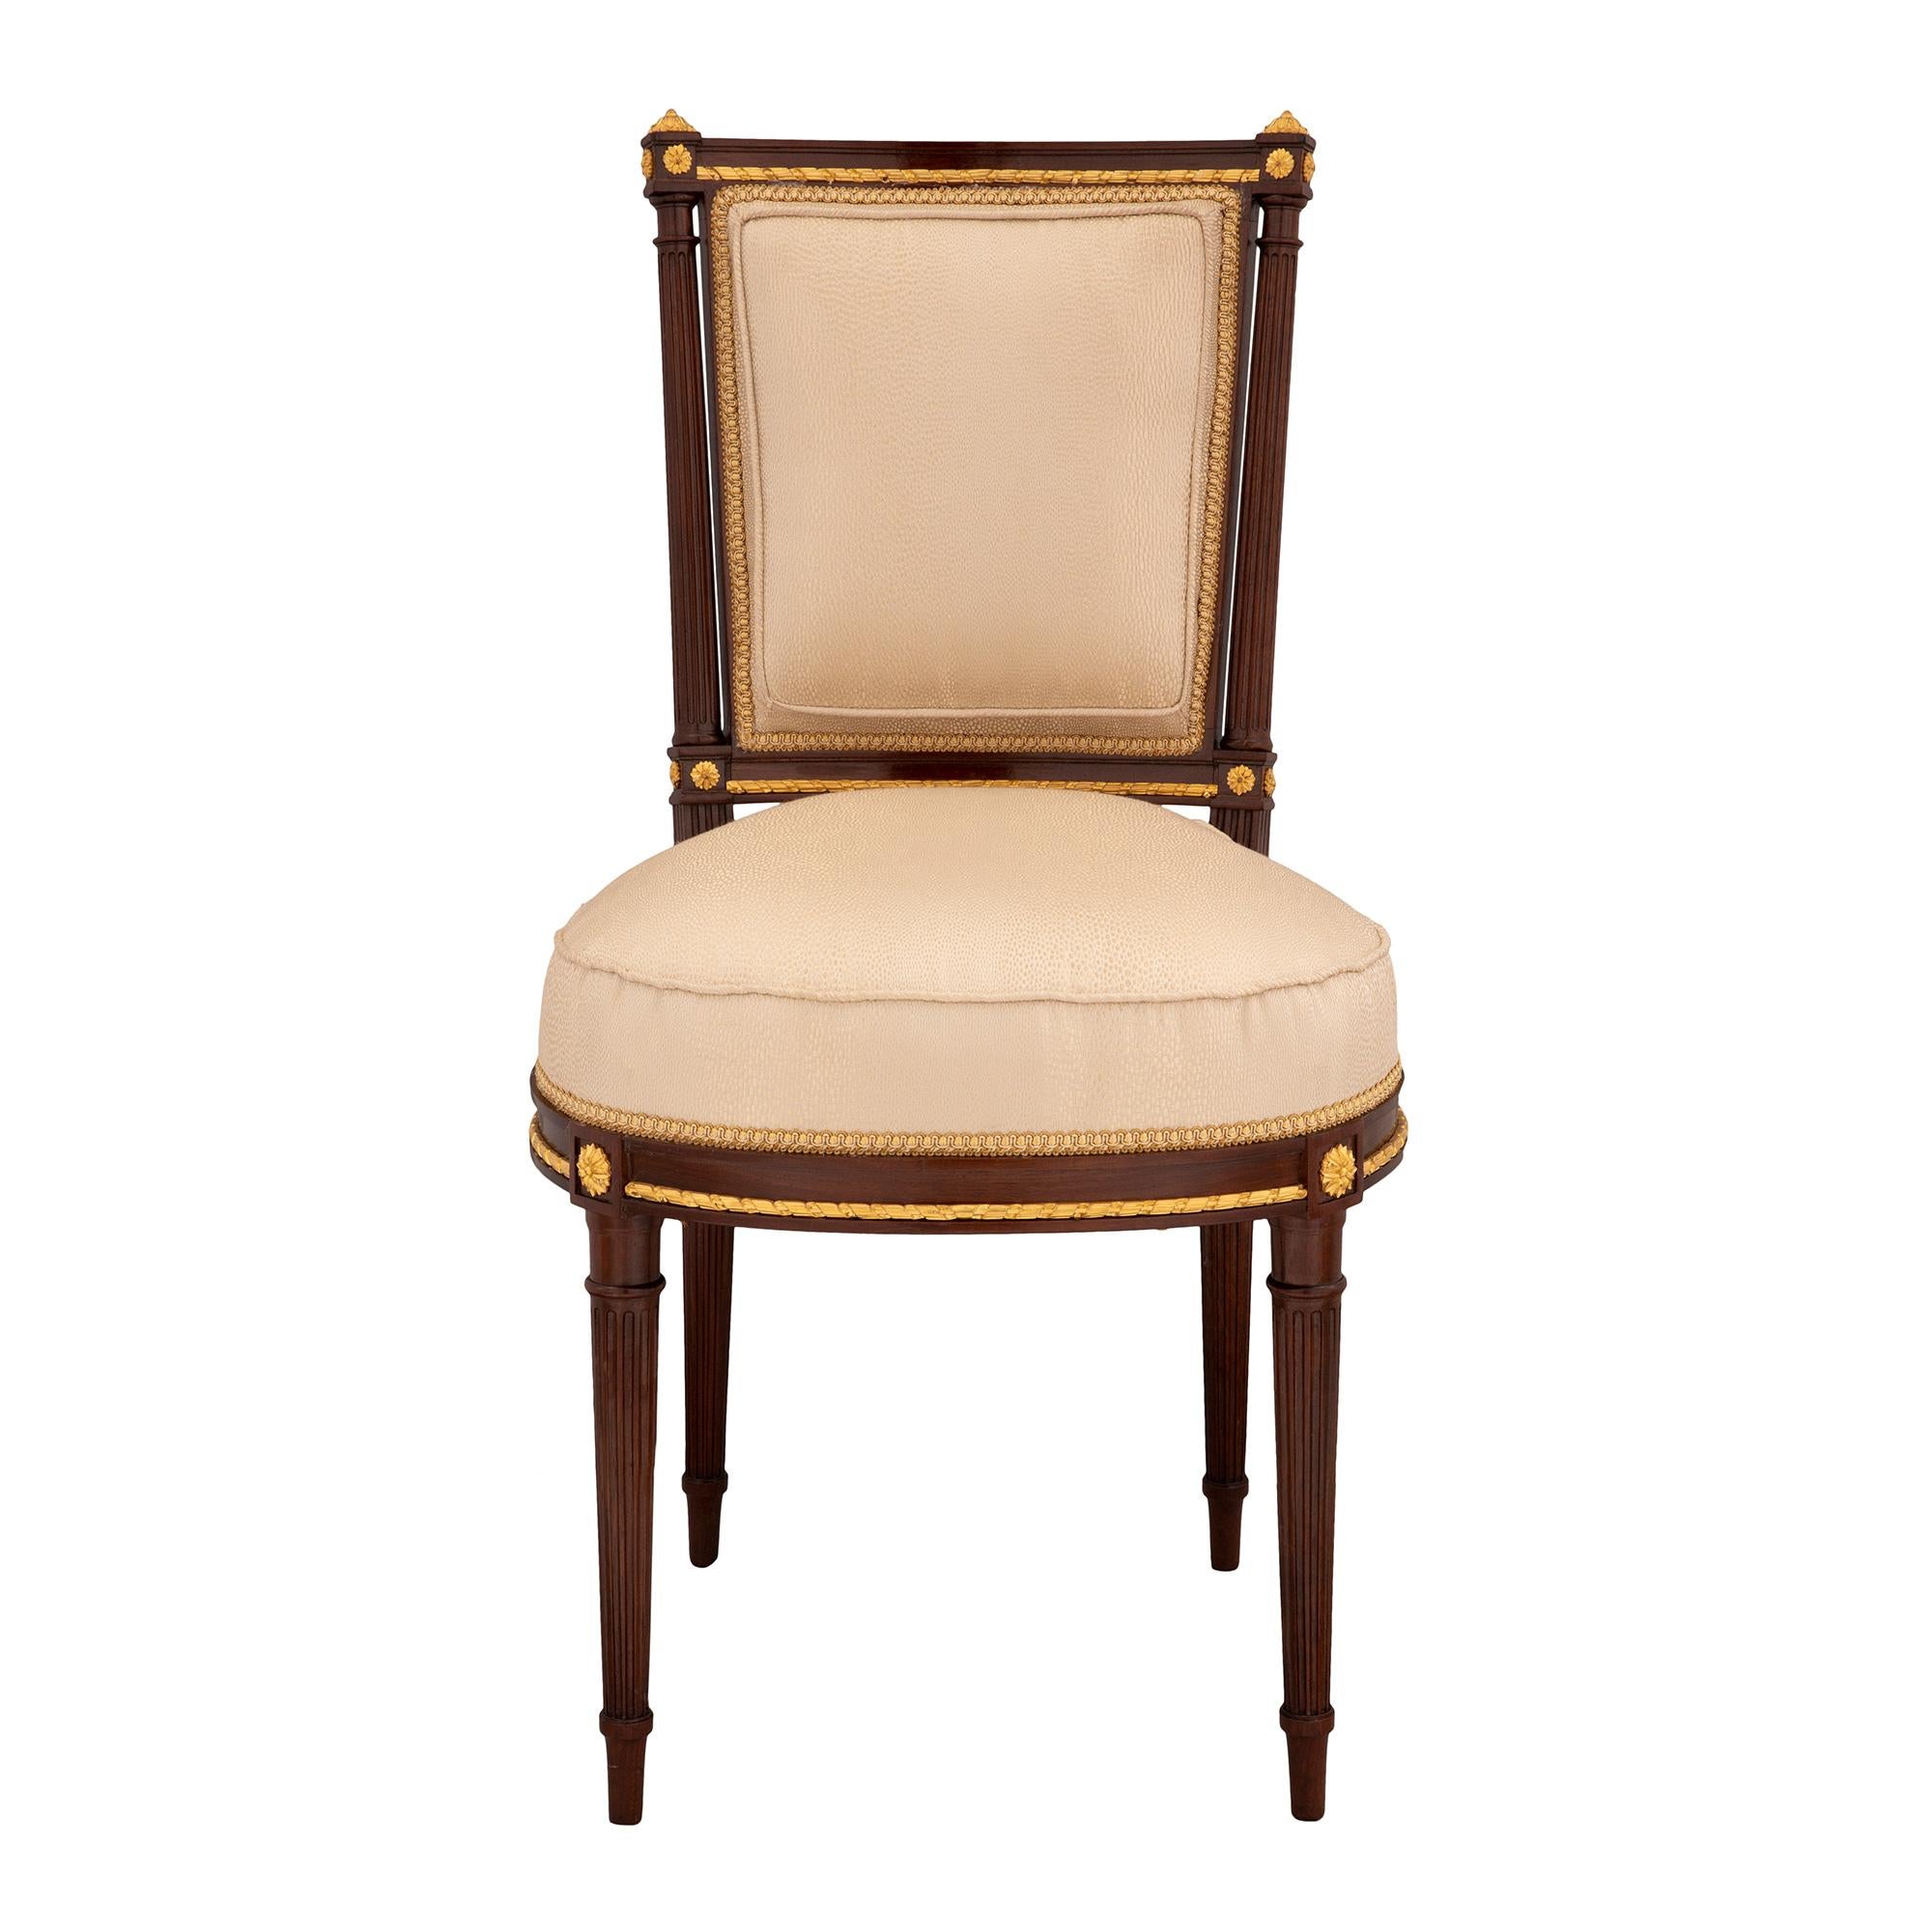 An extremely elegant set of four French 19th century Louis XVI st. mahogany and giltwood side chairs. Each chair is raised by slender circular tapered fluted legs with a finely carved and most decorative giltwood rosette above each leg. A richly